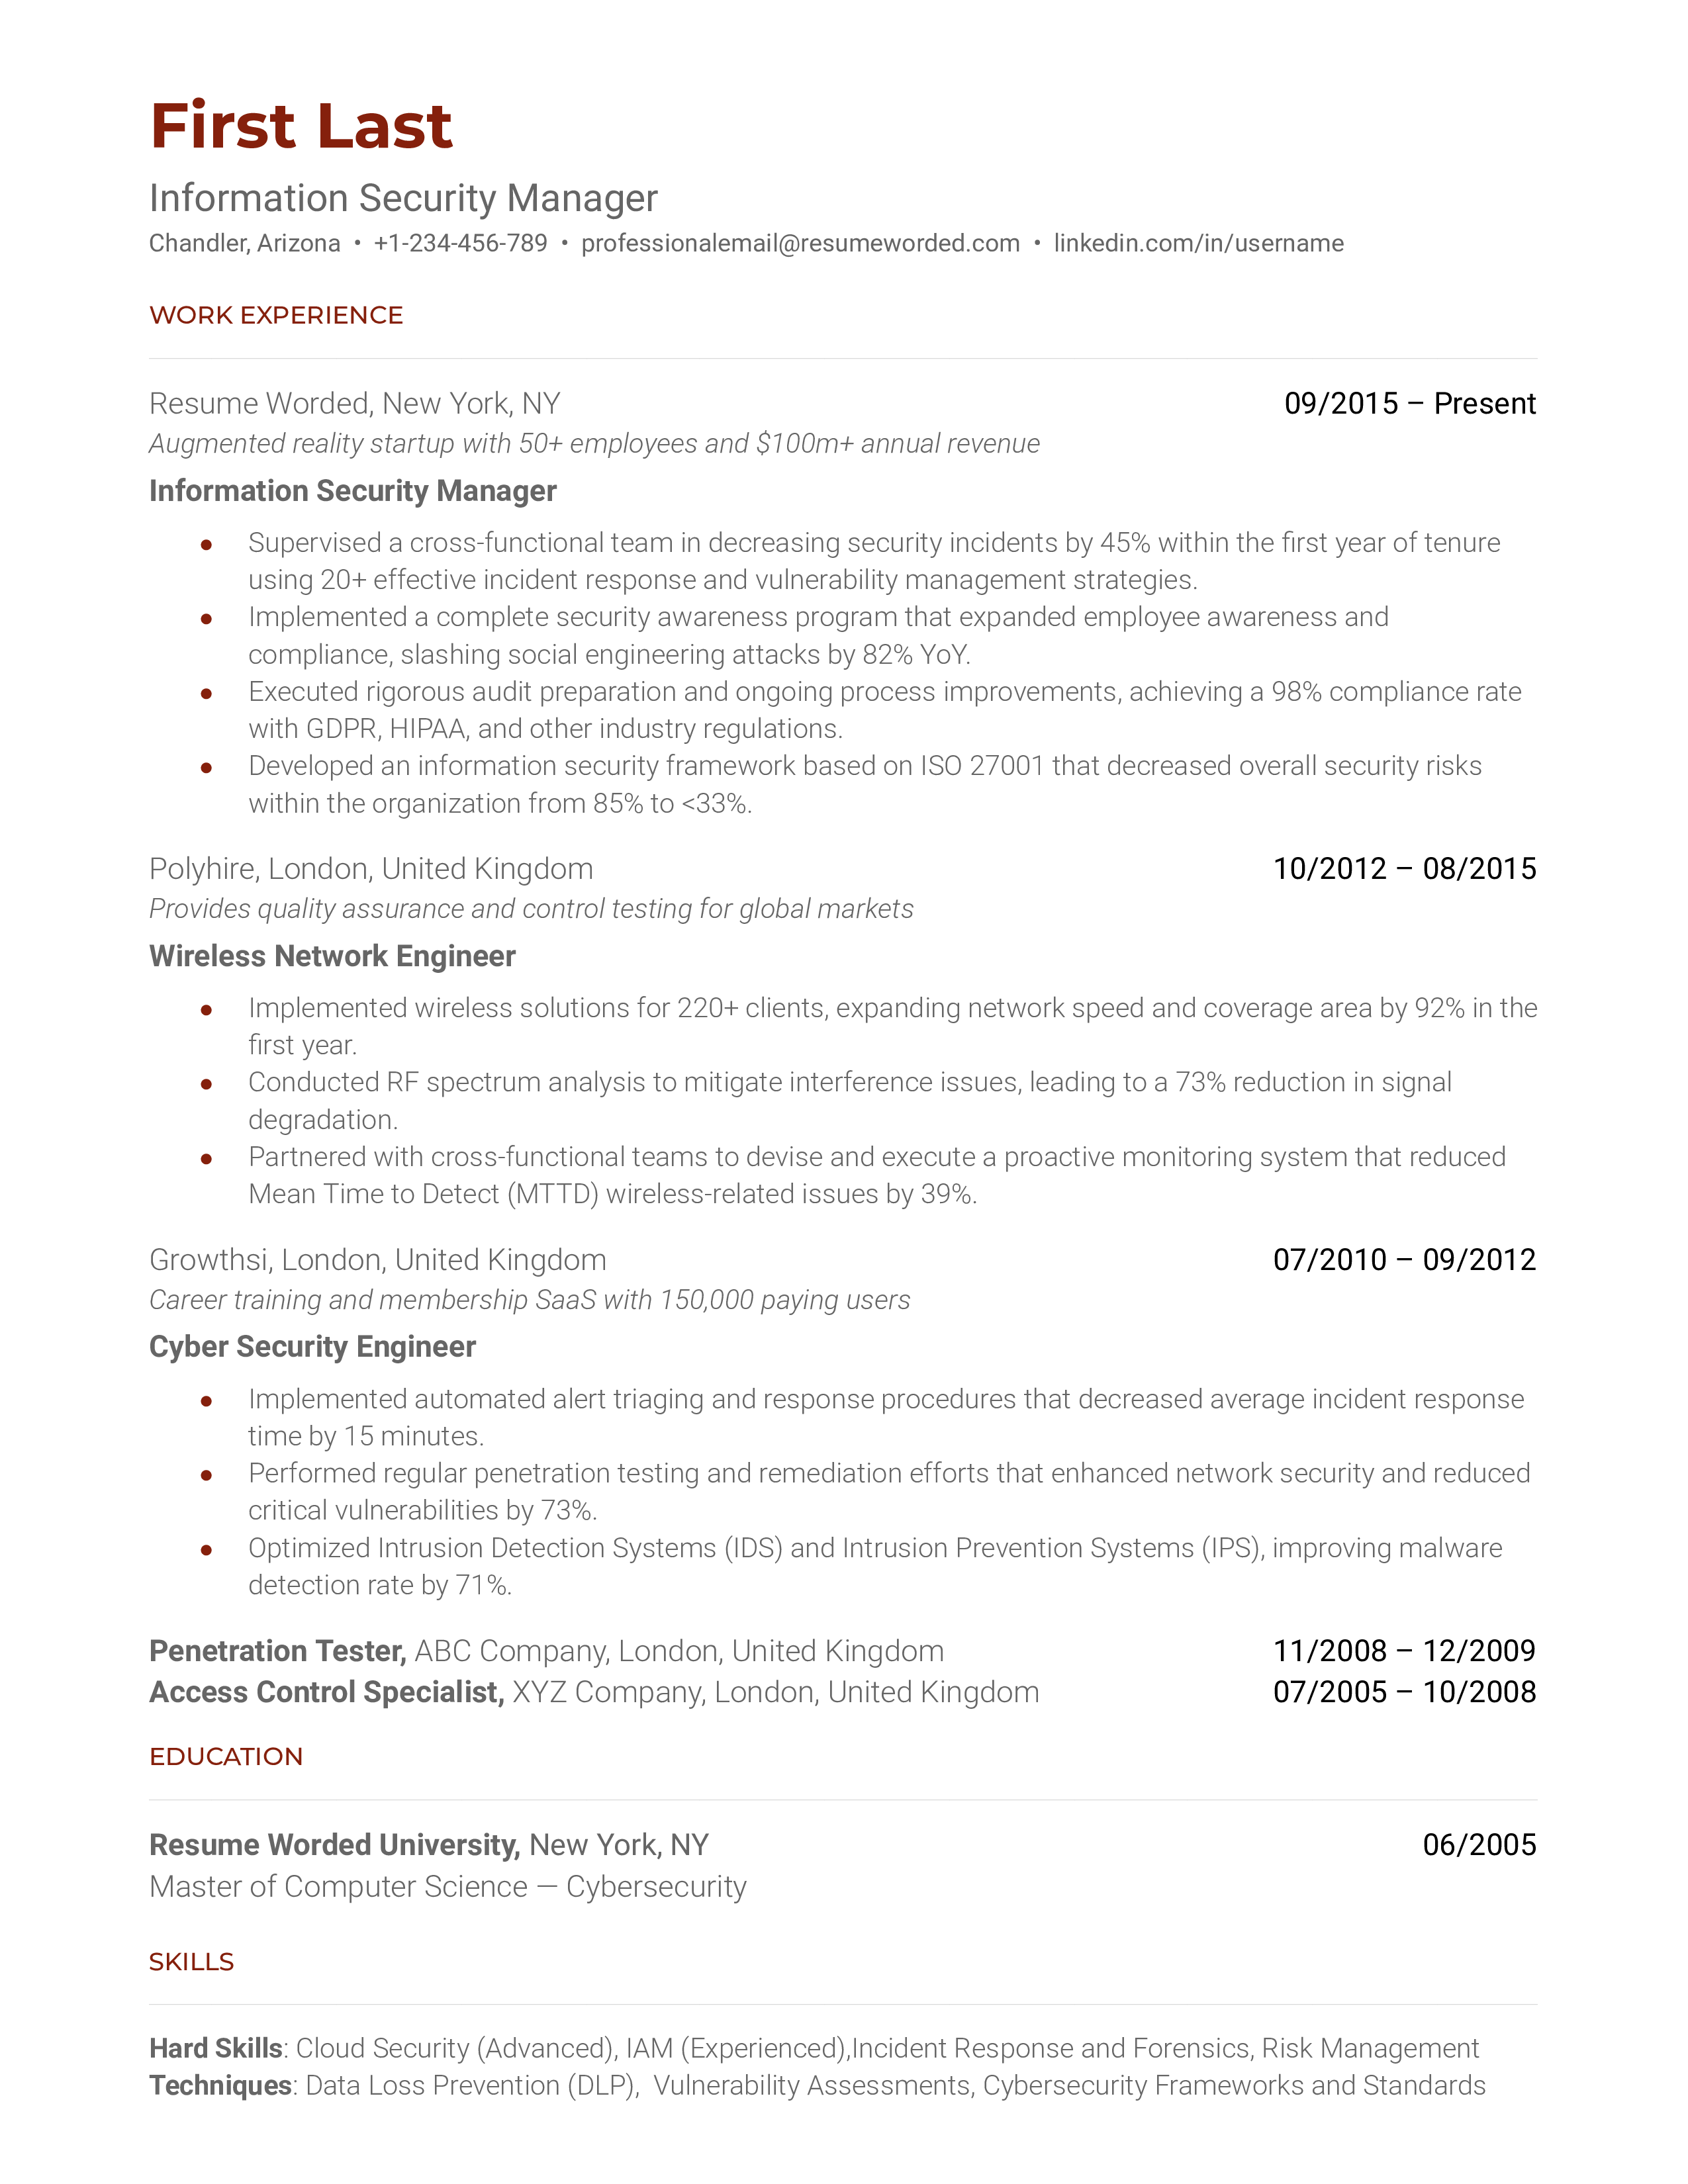 A well-structured resume for an Information Security Manager position.